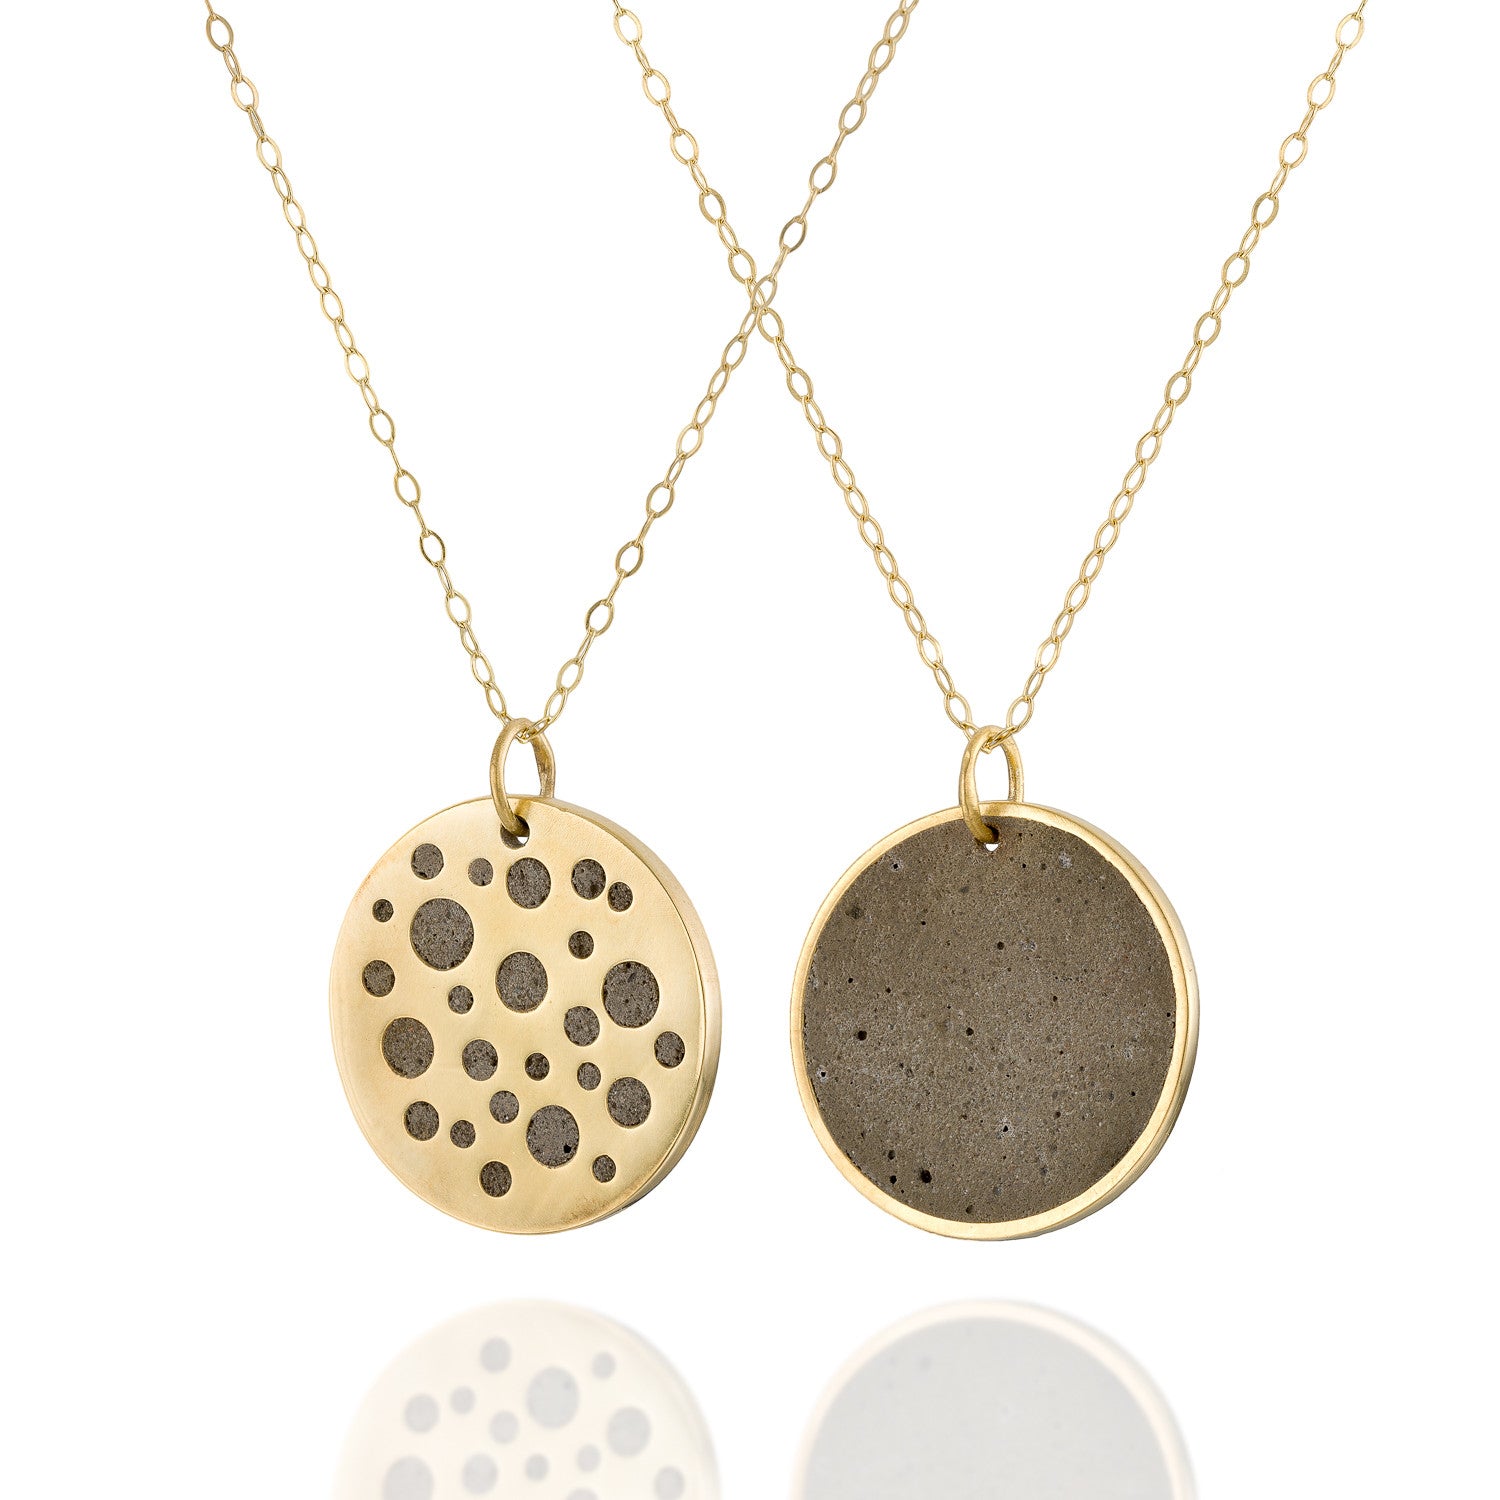 Double Sided Minimalist Concrete Circles Necklace, by BAARA Jewelry. Gold and Cement Handmade, Unique Jewelry. Perfect gift for Stylish Girls and Women. Gold Plated Brass and Beton Jewelry